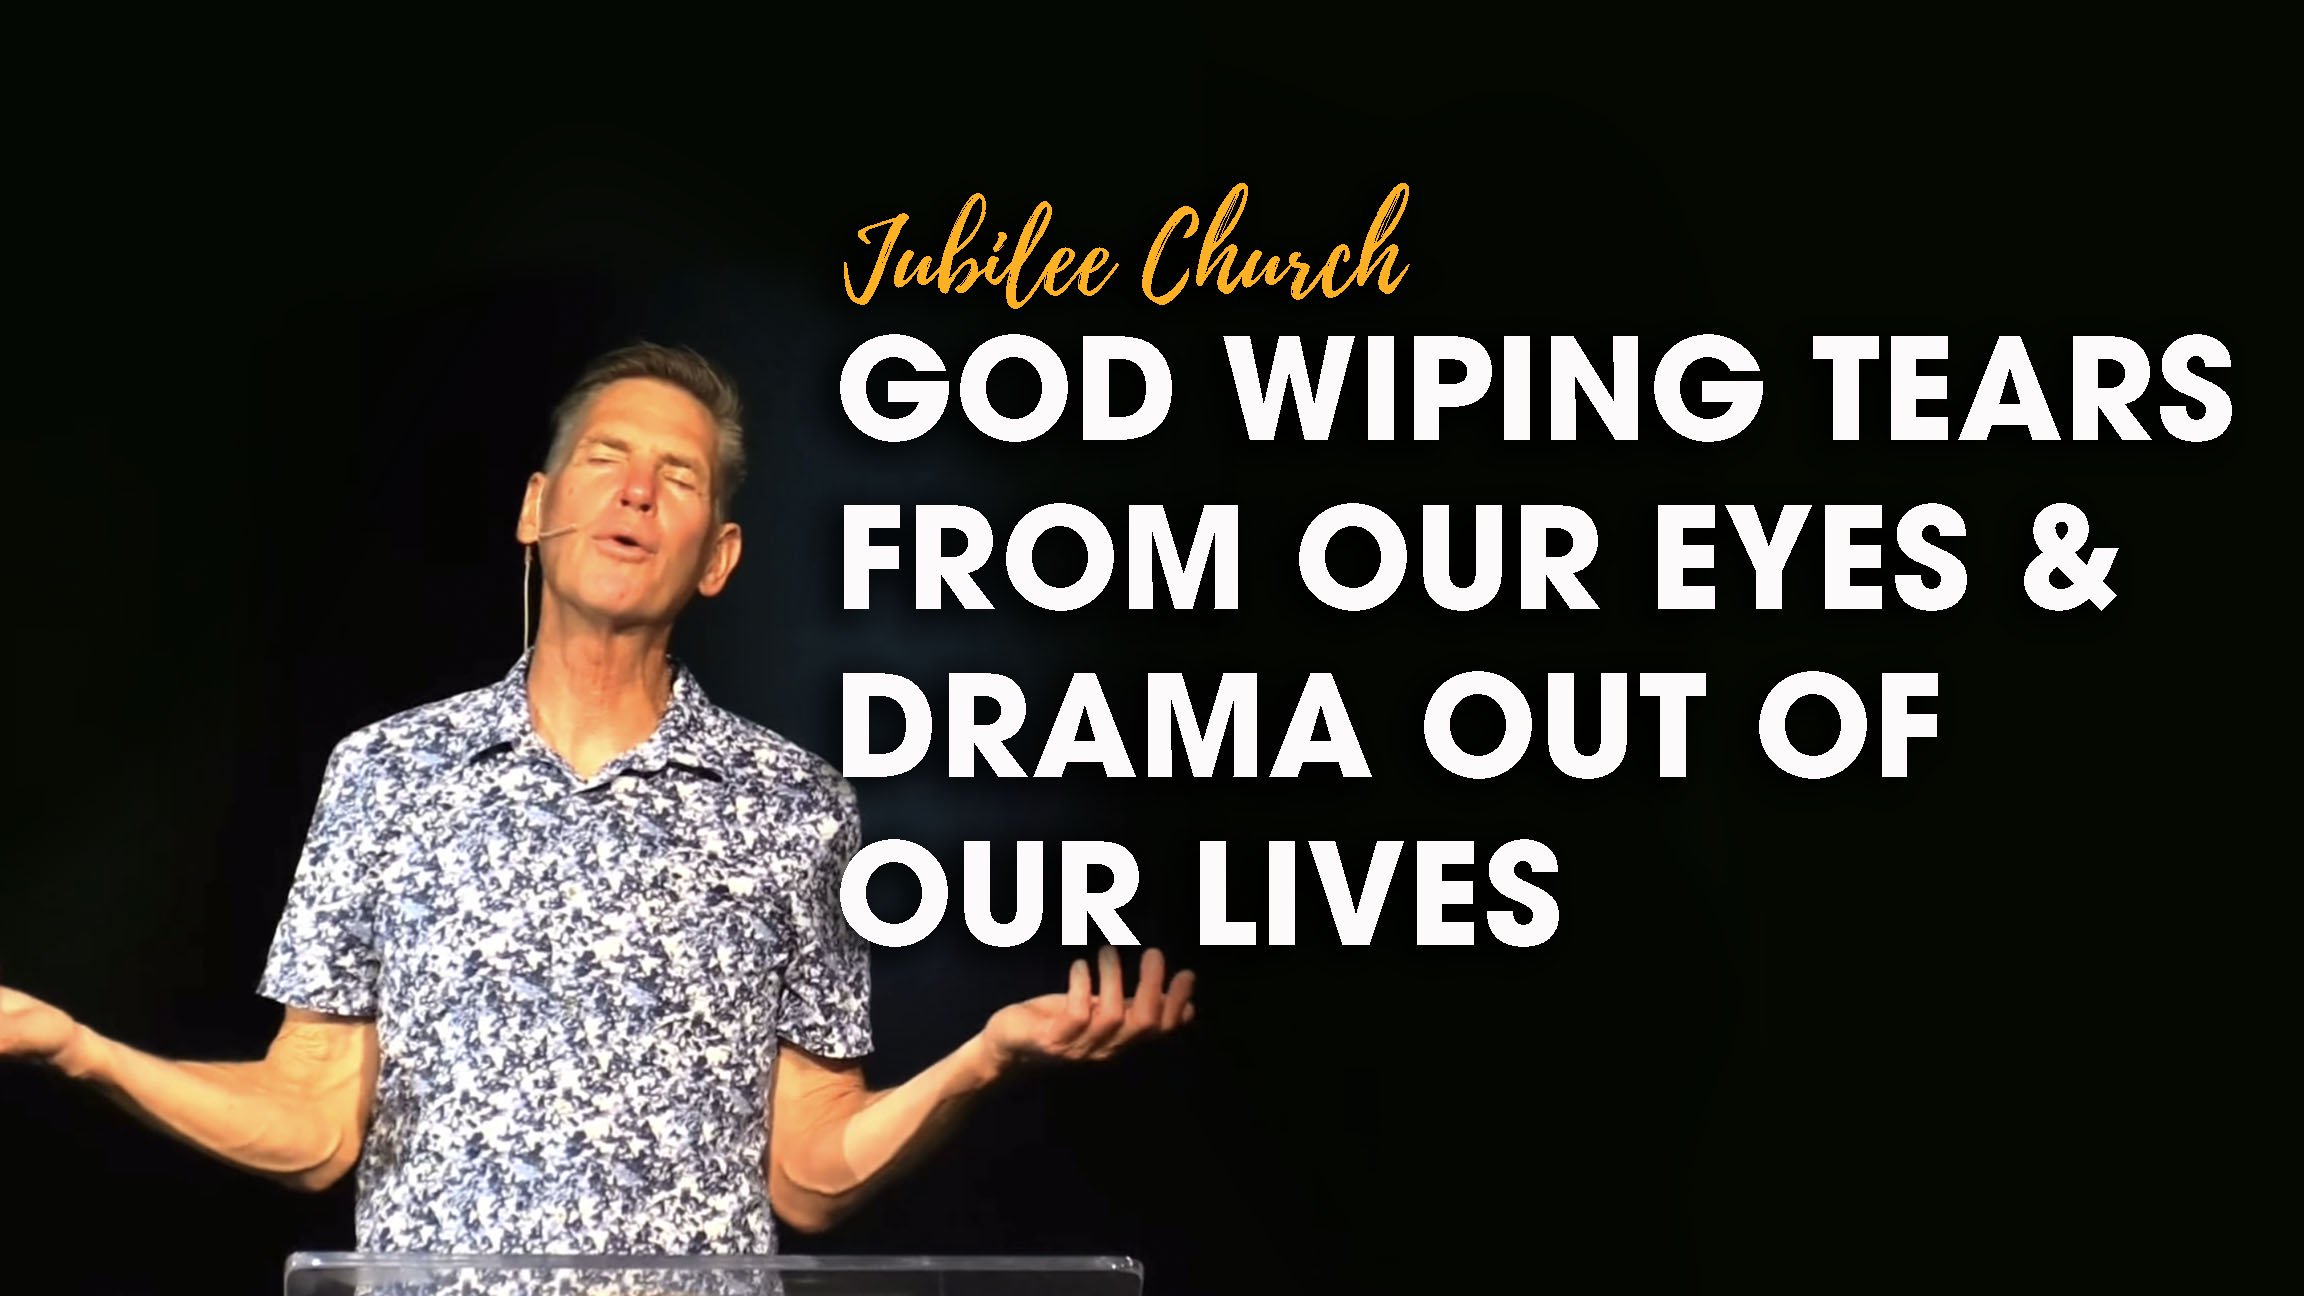 God Wiping Tears from Our Eyes and Drama Out of Our Lives